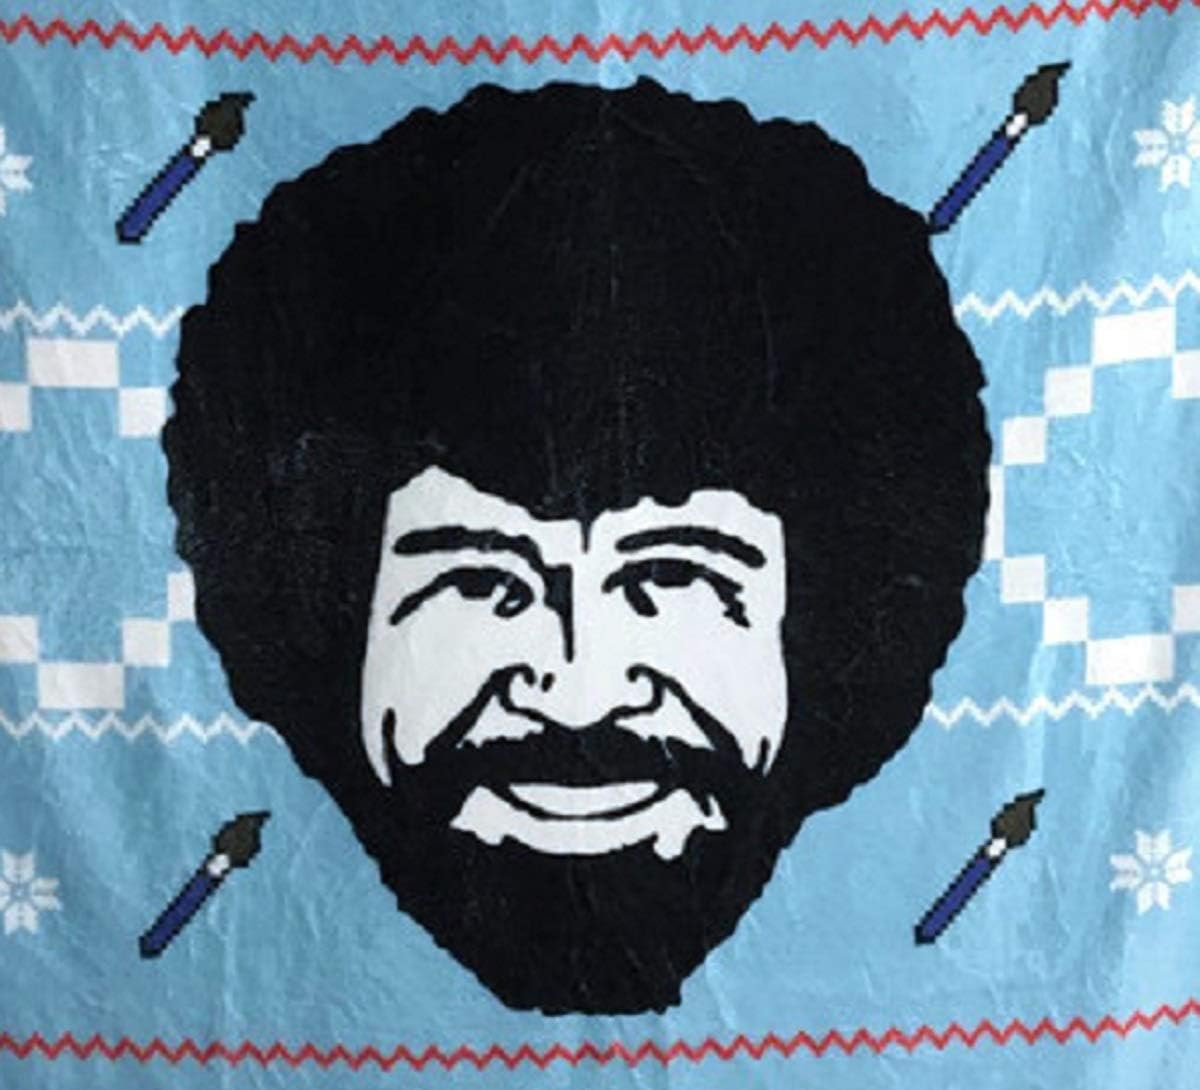 Bob Ross Paint Happy Trees Fleece Softest Comfy Throw Blanket for Adults & Kids| Measures 60 x 45 Inches